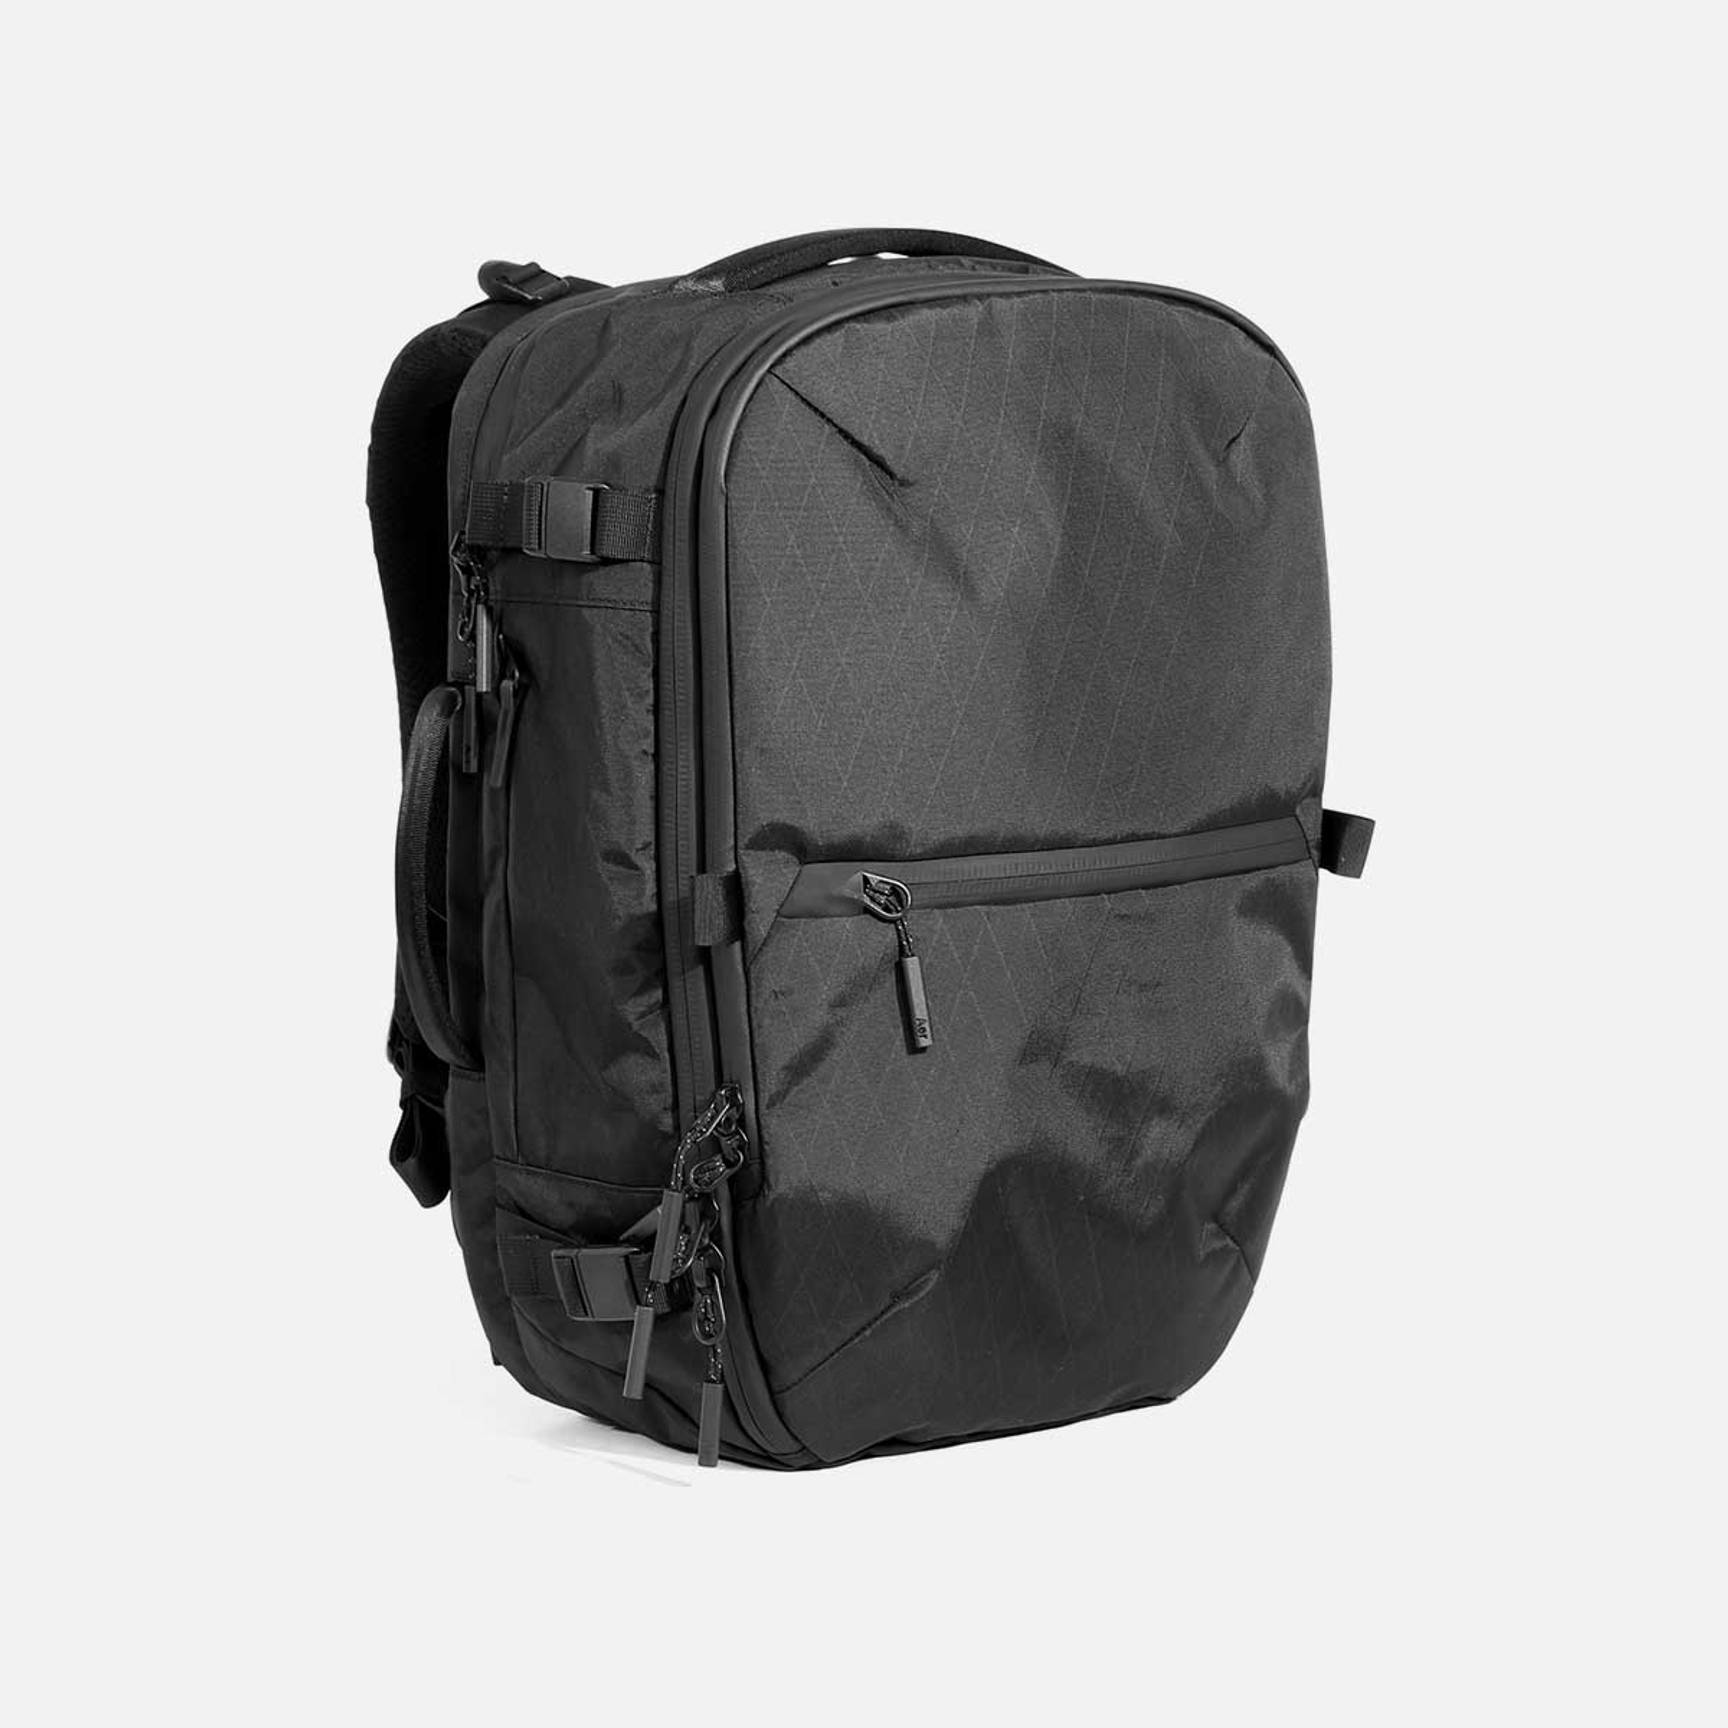 Aer travel pack 3 small x-pac ほぼ新品Aer